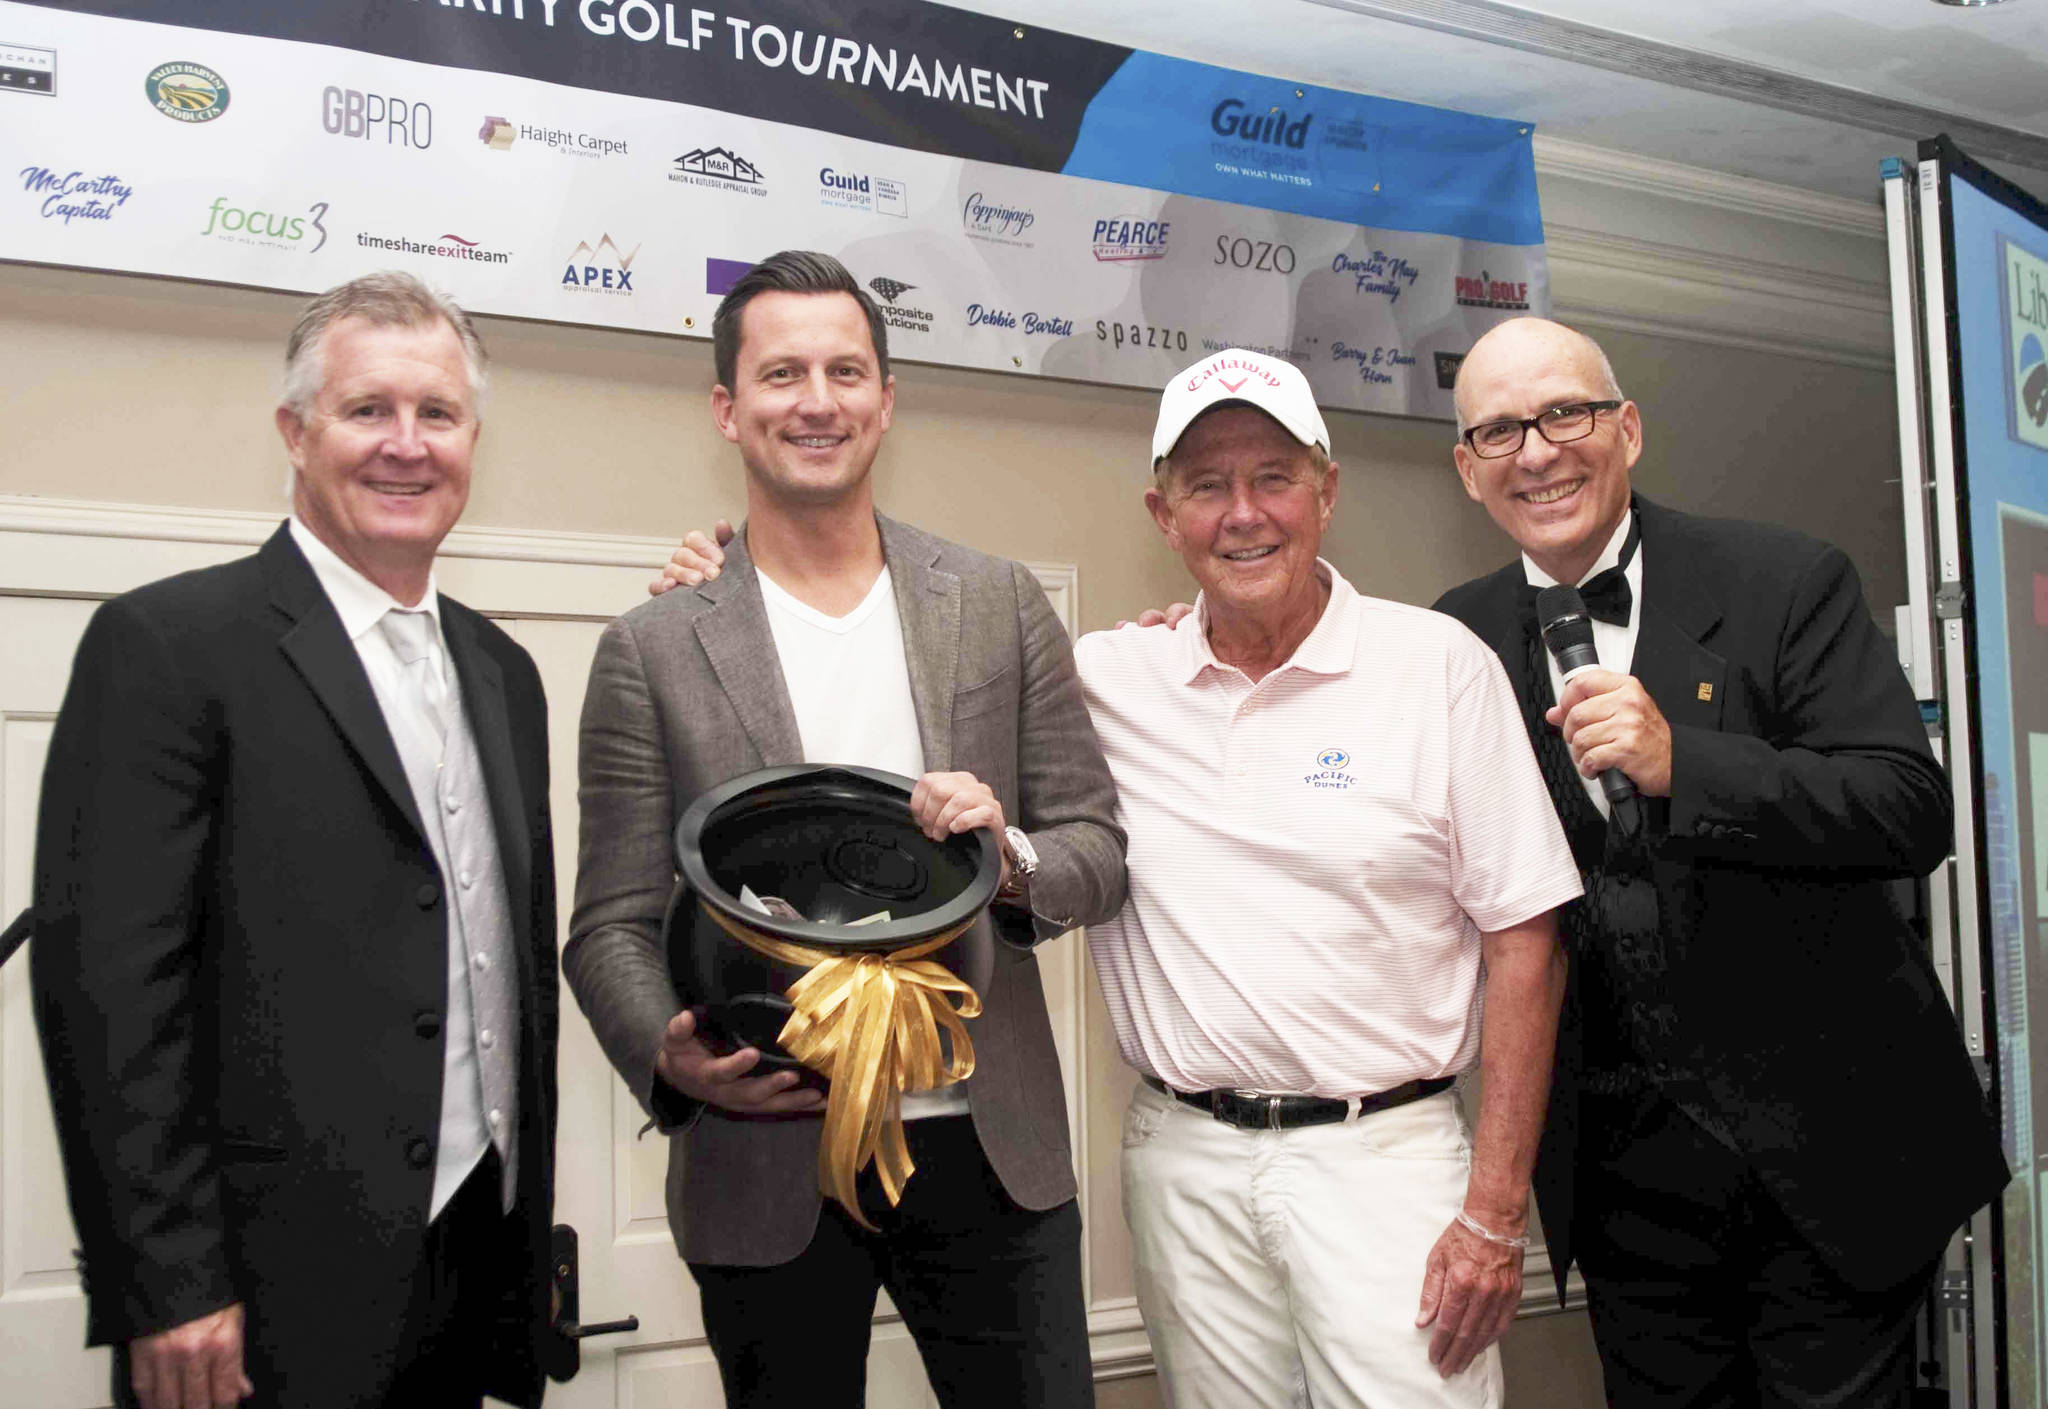 The 13th Annual Liberty Road Foundation Charity Golf Tournament and Dinner Auction raised more than $430,000 for those in need. The foundation is based in Redmond. Courtesy photo